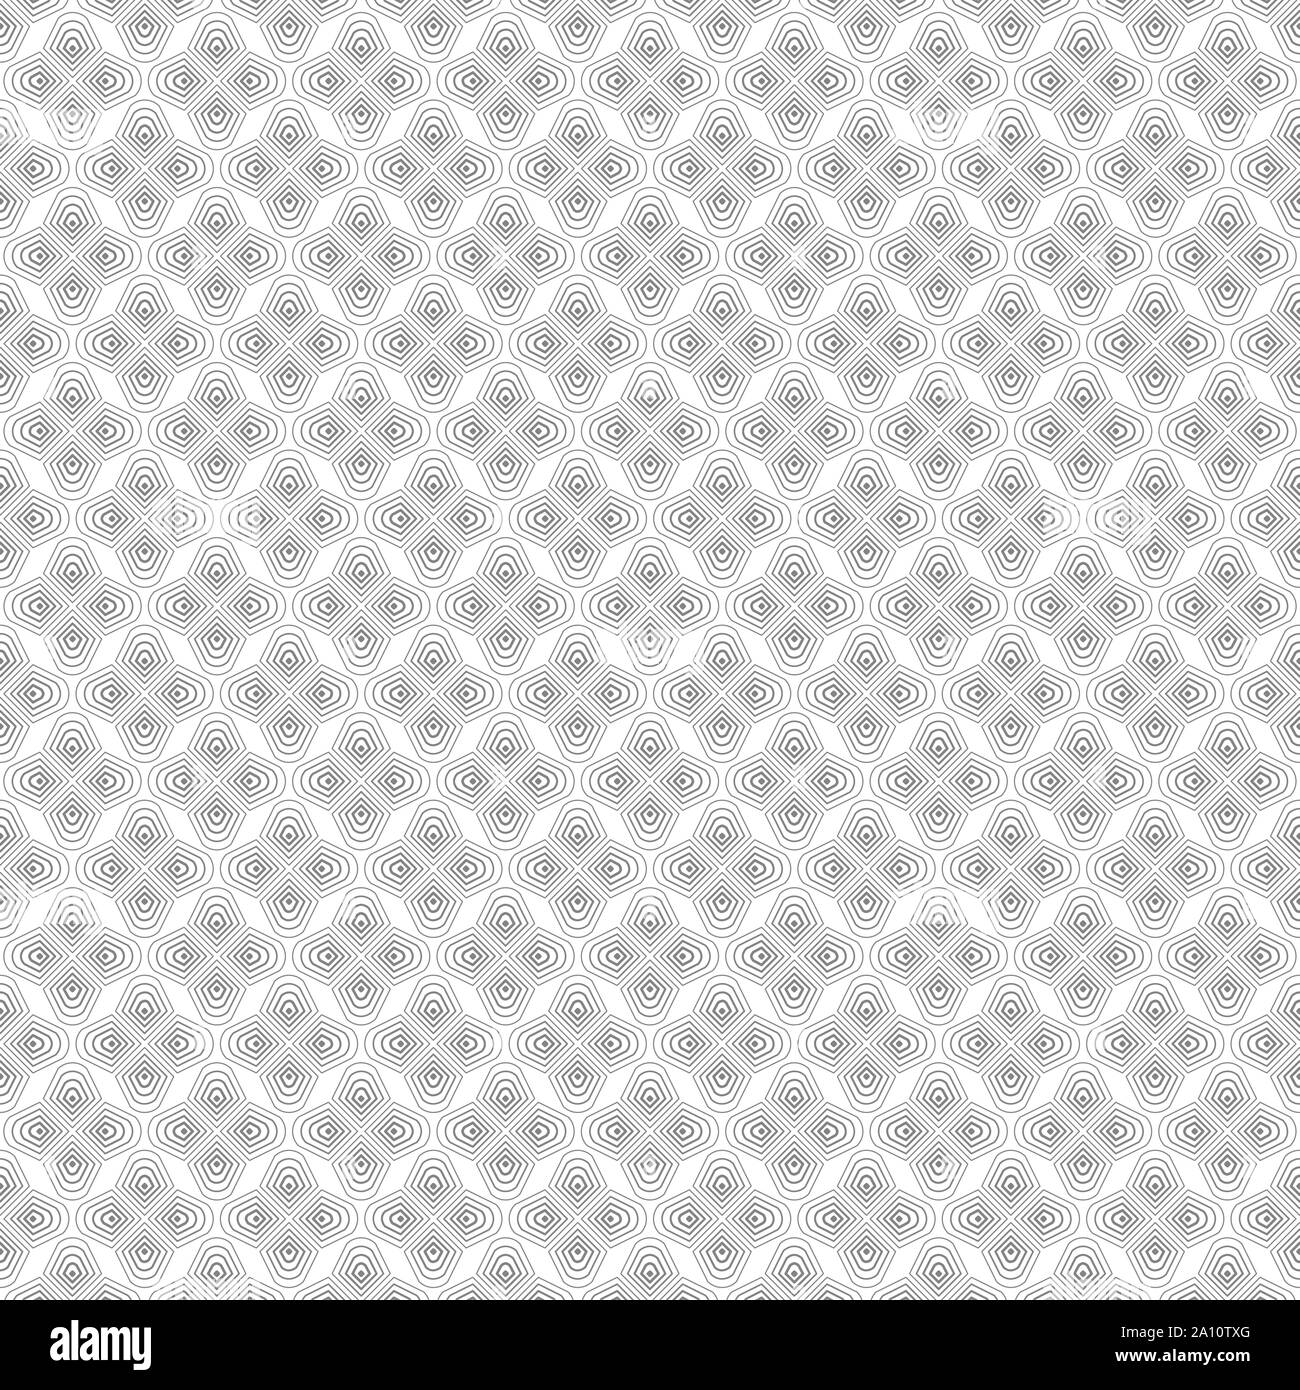 Abstract modern geometric in gray pattern design background. You can use ad, poster, artwork, template design. illustration vector eps10 Stock Photo